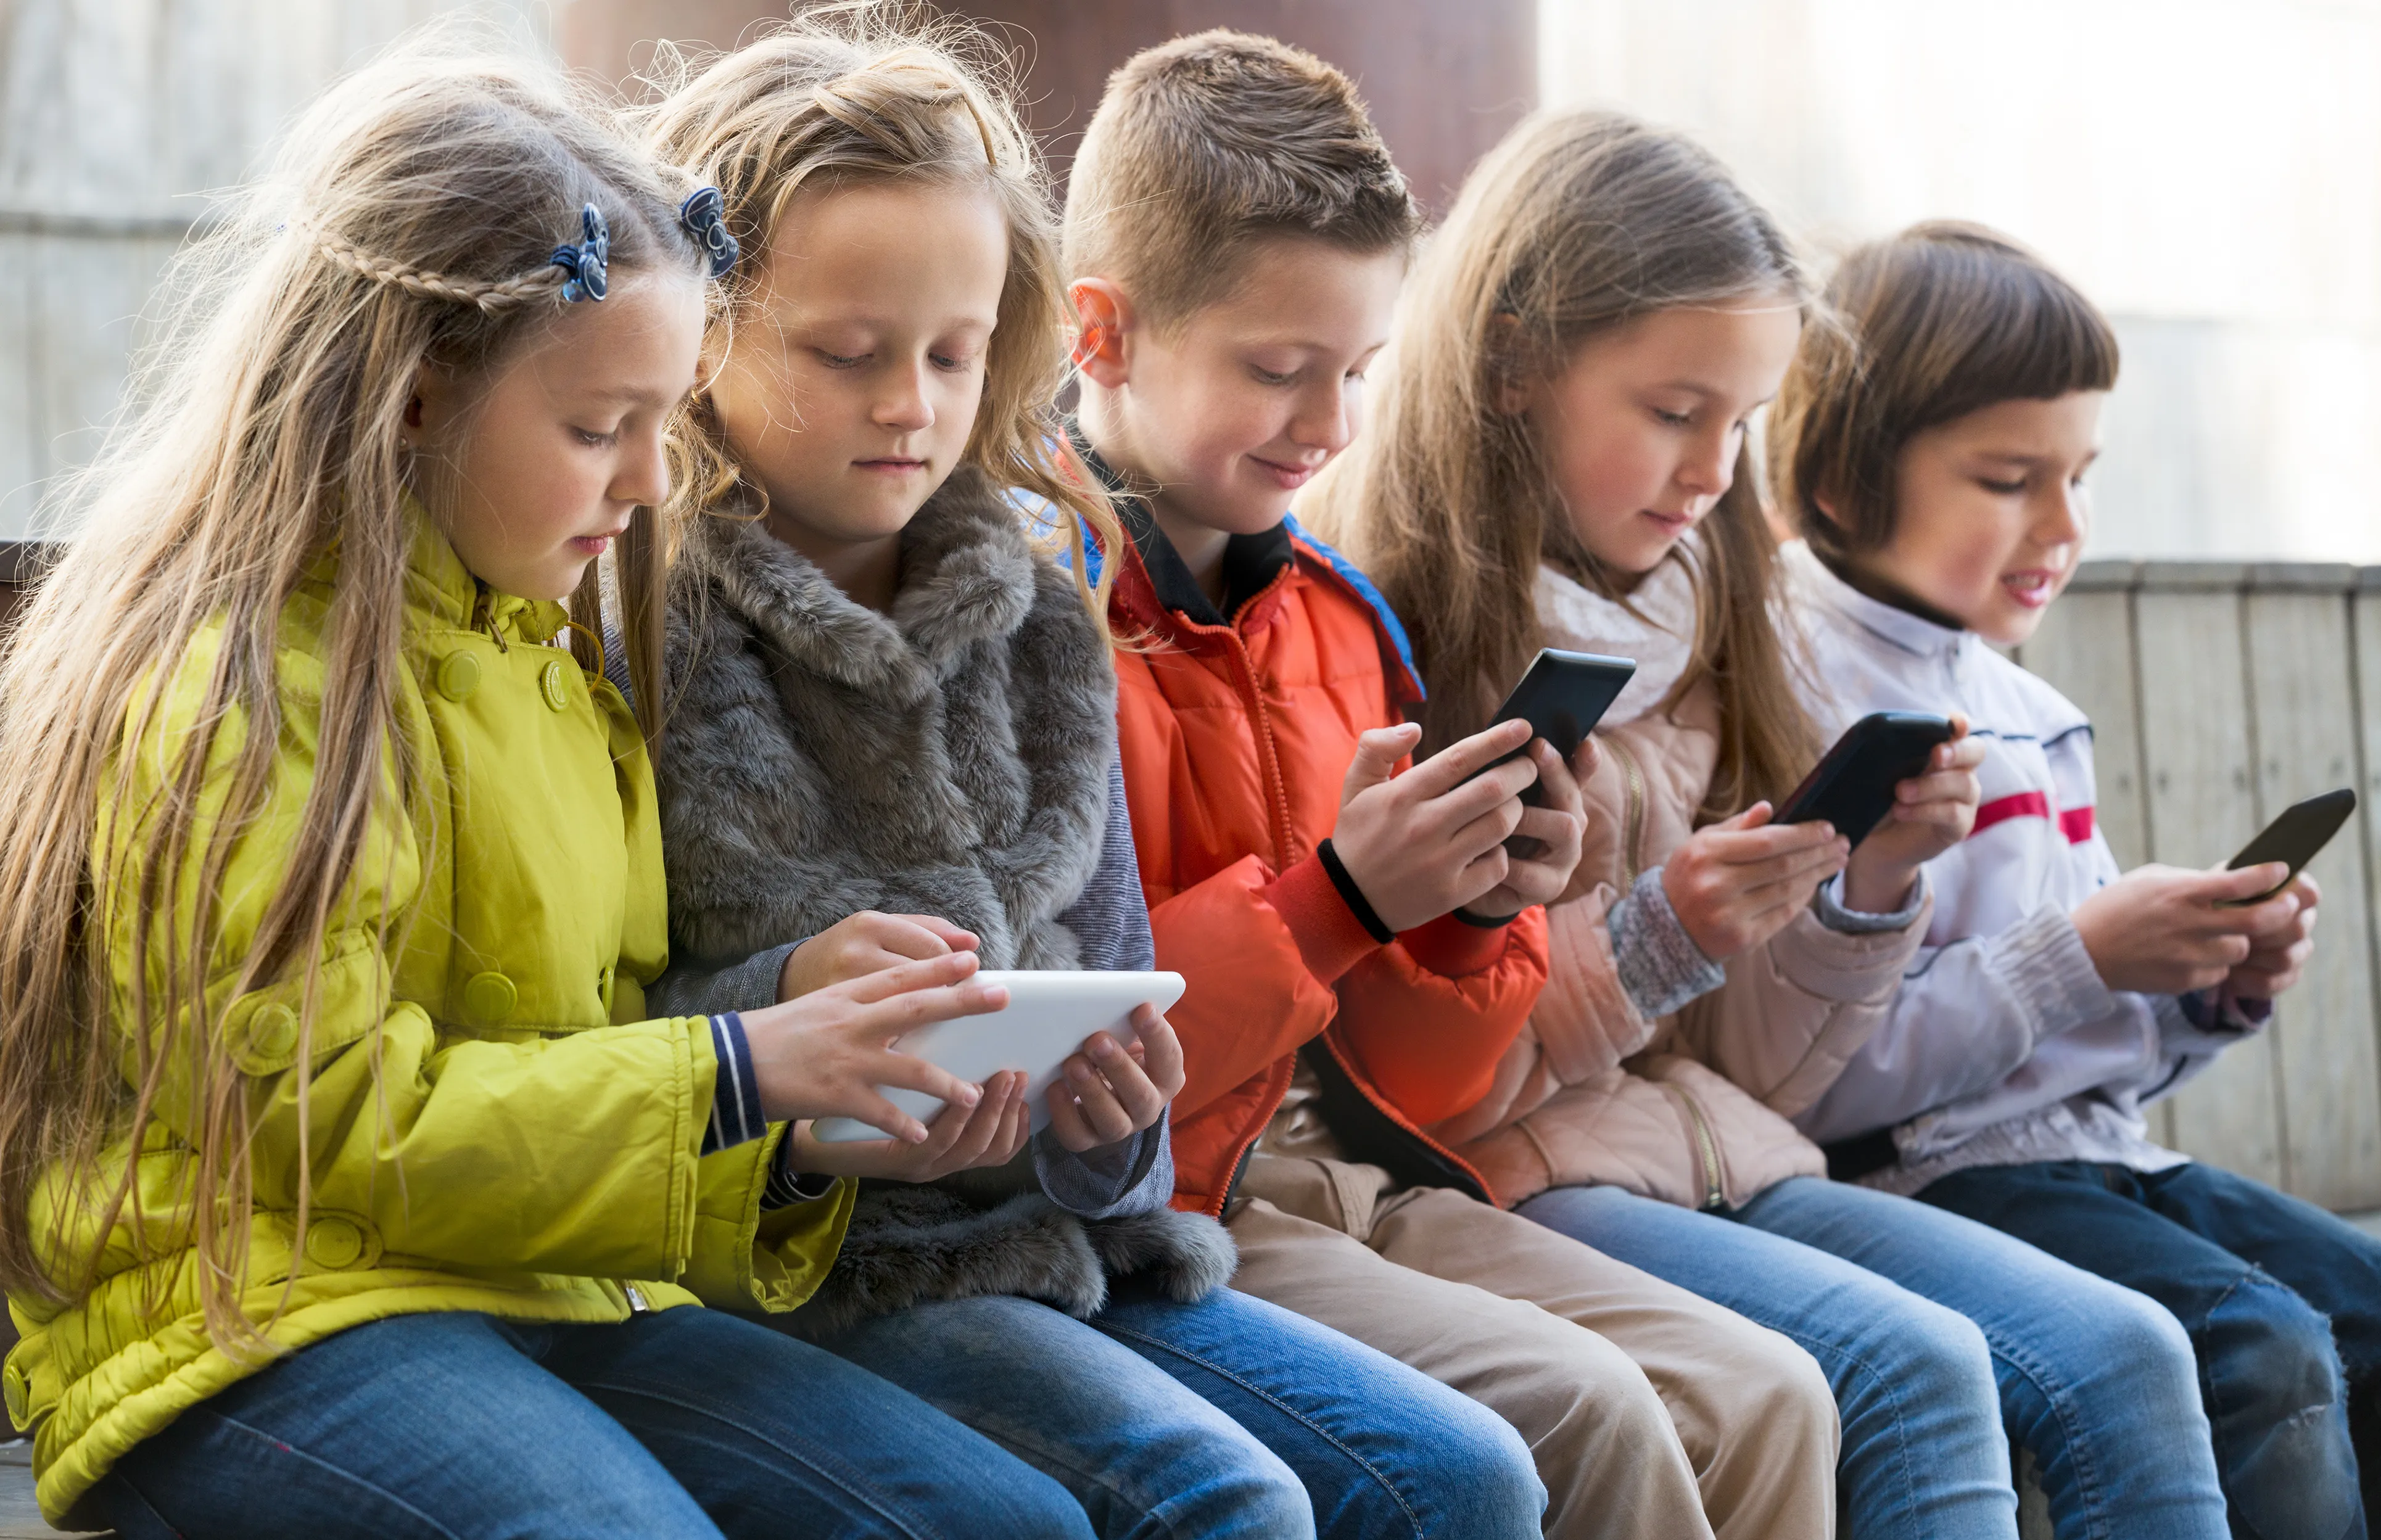 12 Websites and Apps to Help Prepare Your Kids for Life